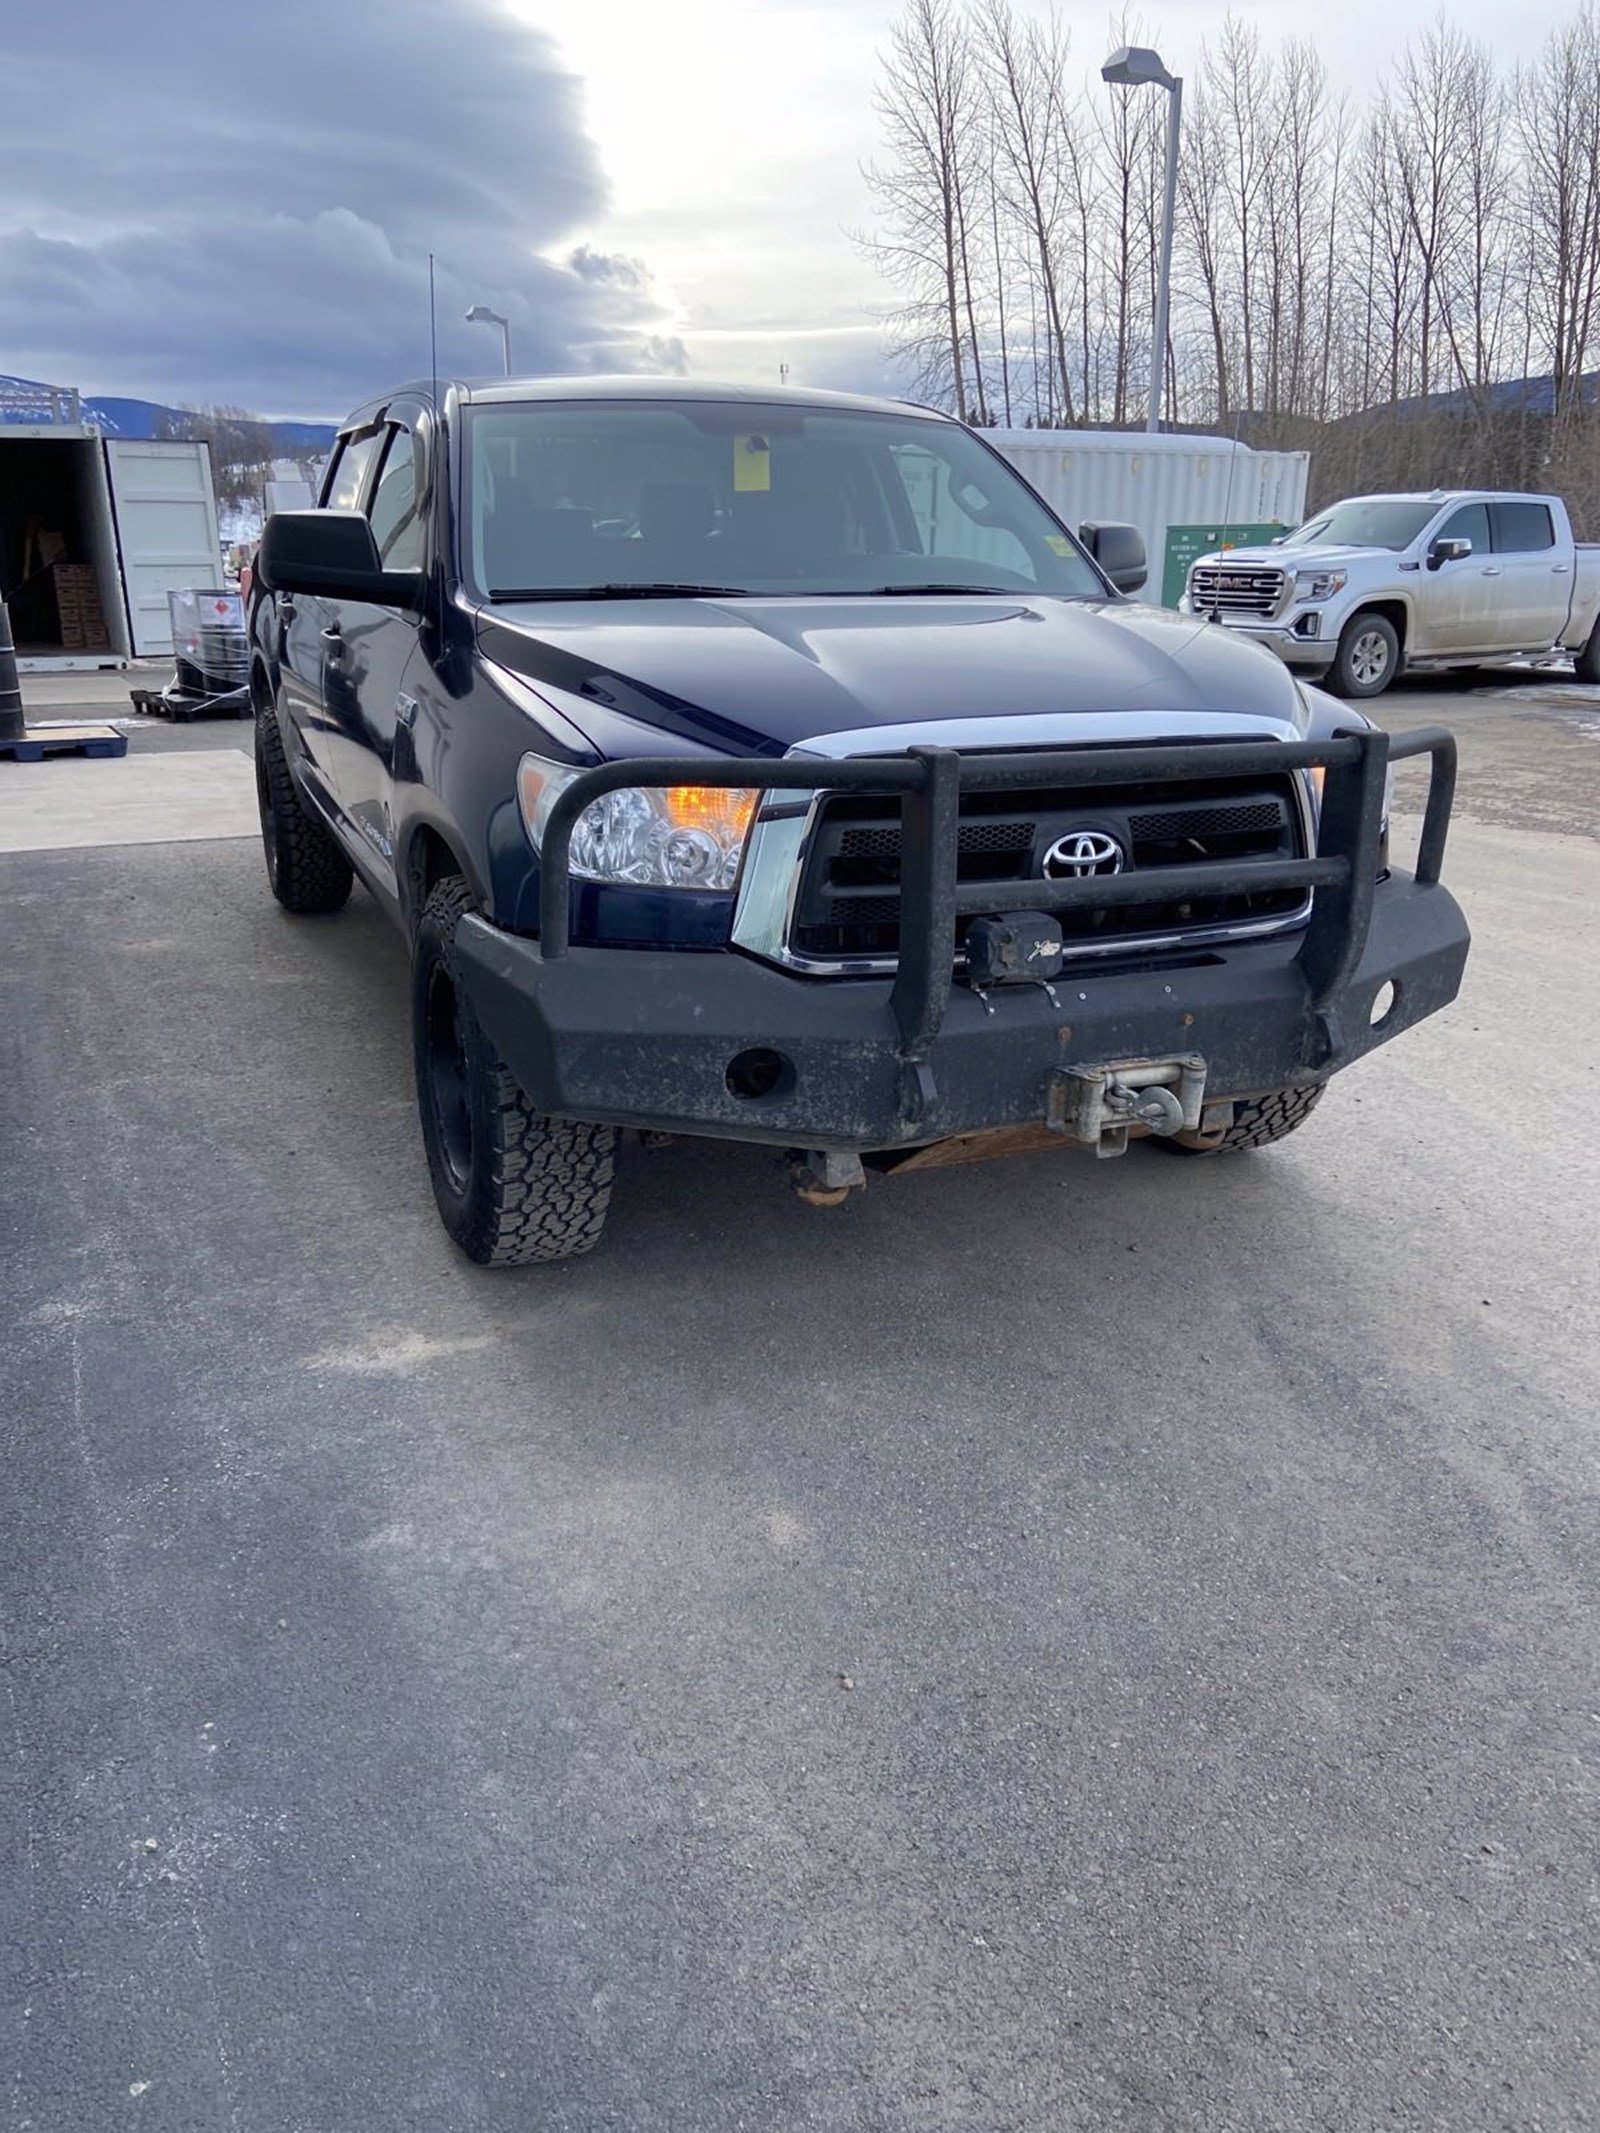 Pre-Owned 2012 TOYOTA TUNDRA SR5 Four Wheel Drive 4WD Crewmax 146 5.7L